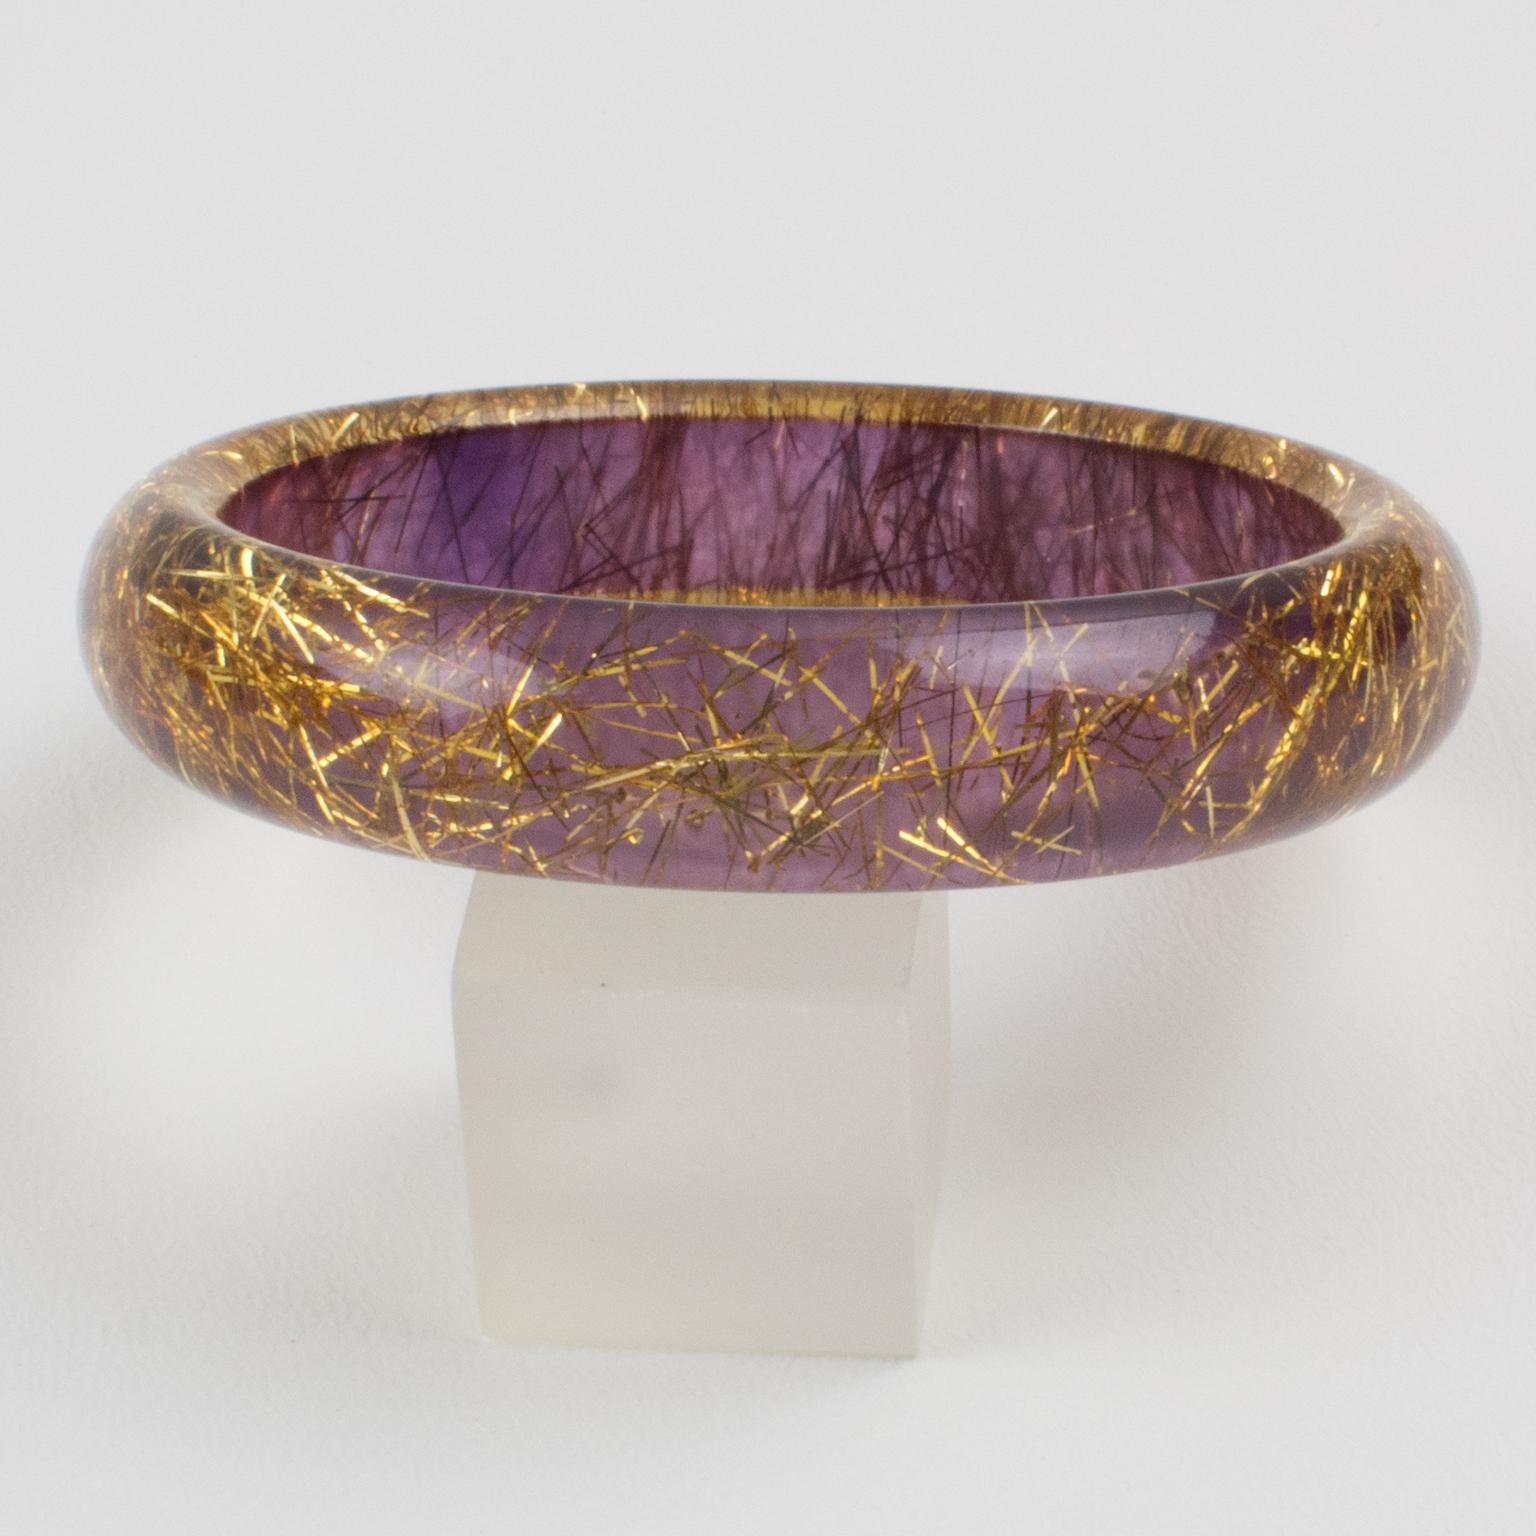 Modern Lucite Bracelet Bangle Gold Metallic Thread Inclusions over Purple Background